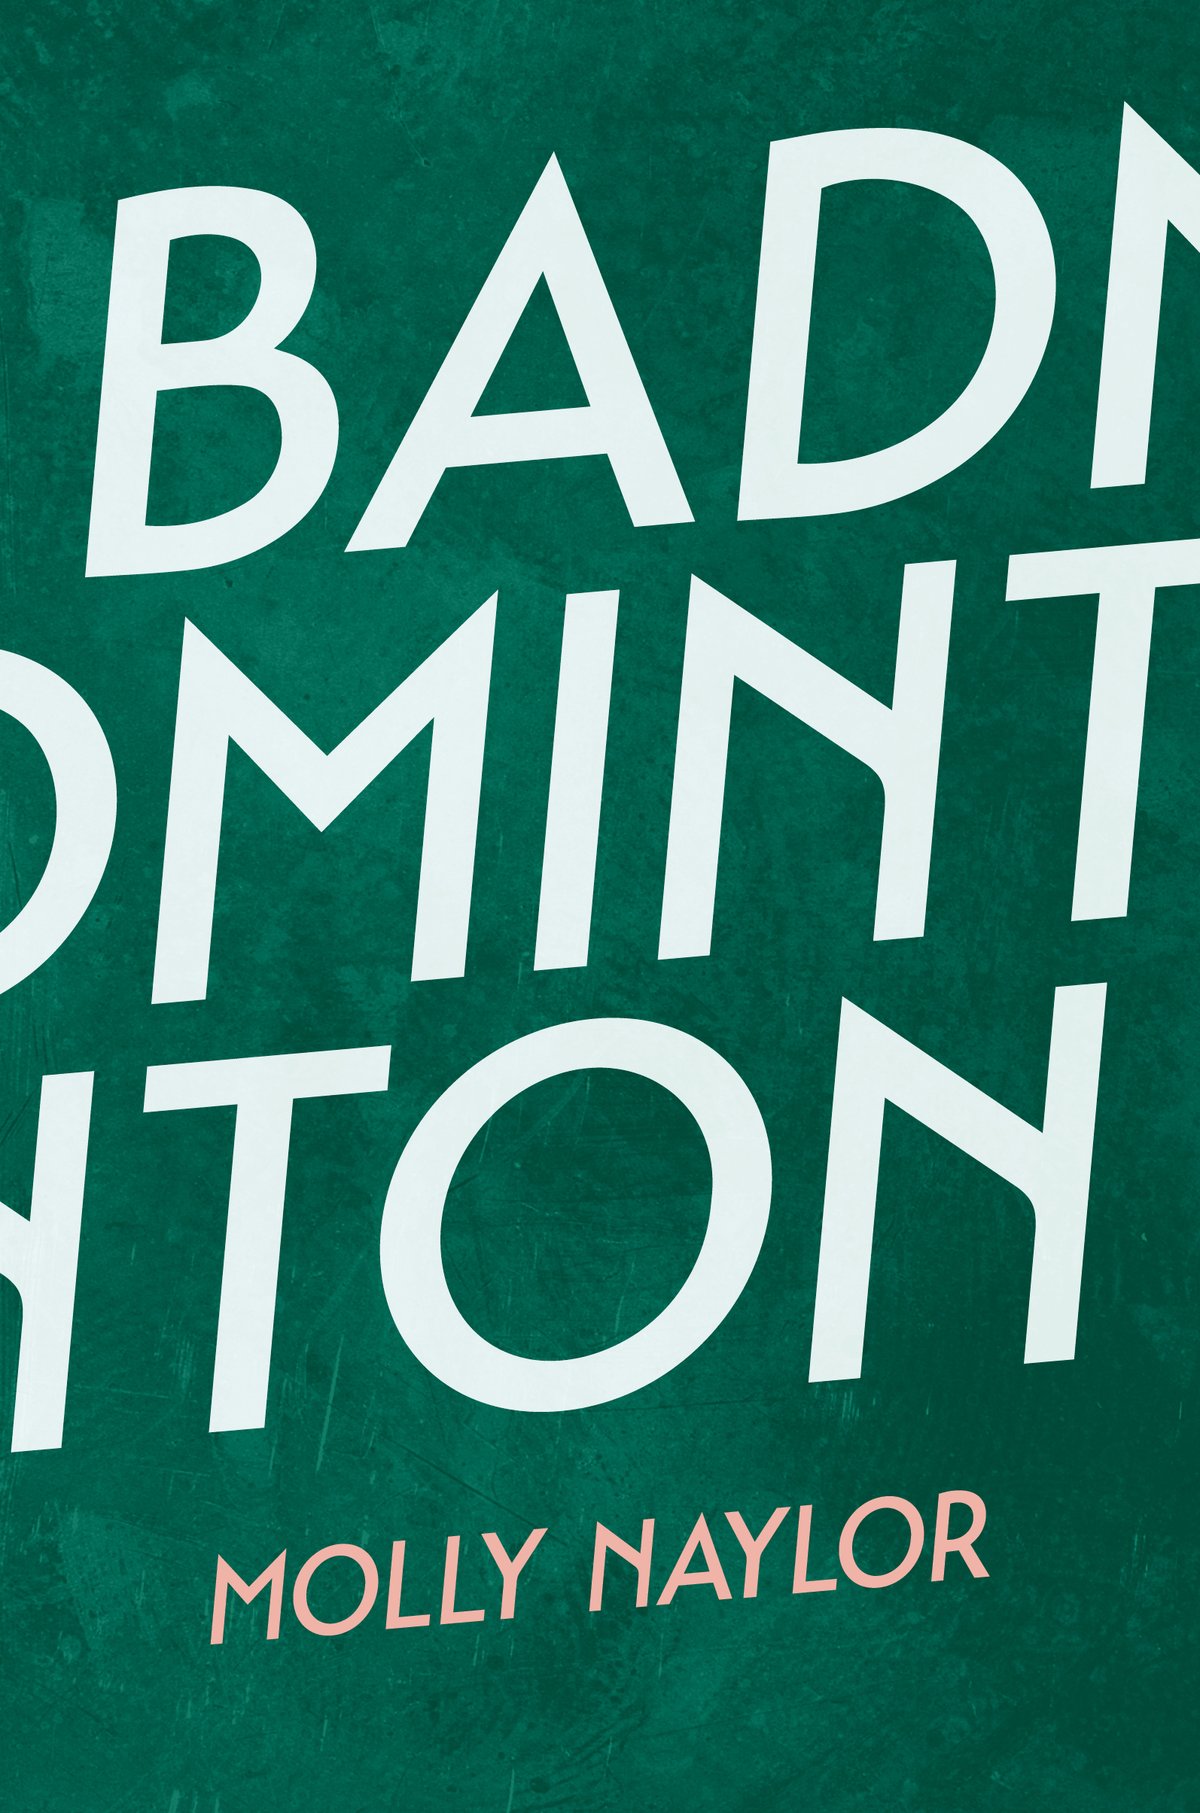 Image of Badminton by Molly Naylor